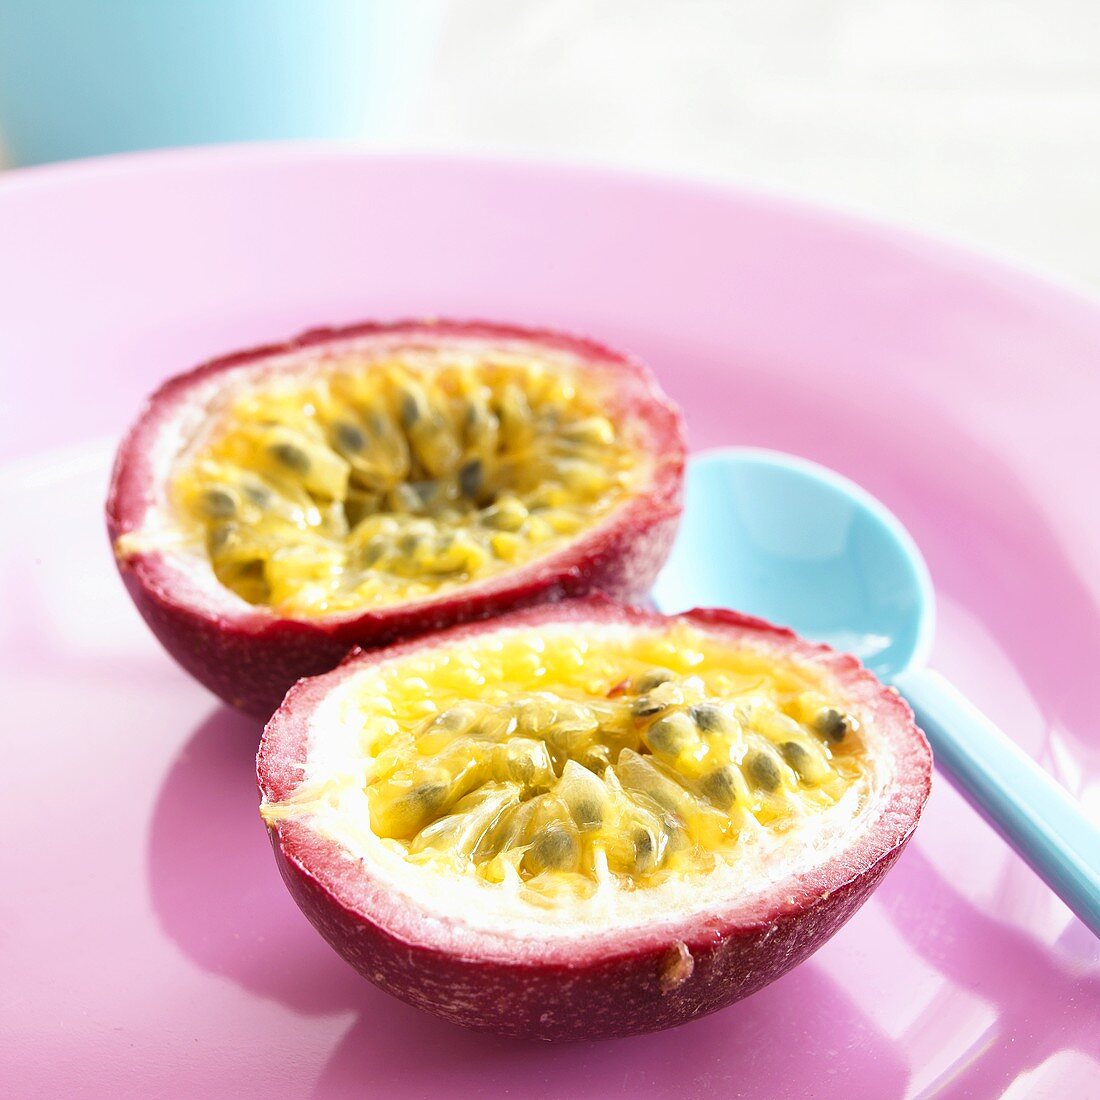 Passion fruit, halved, on plate with spoon